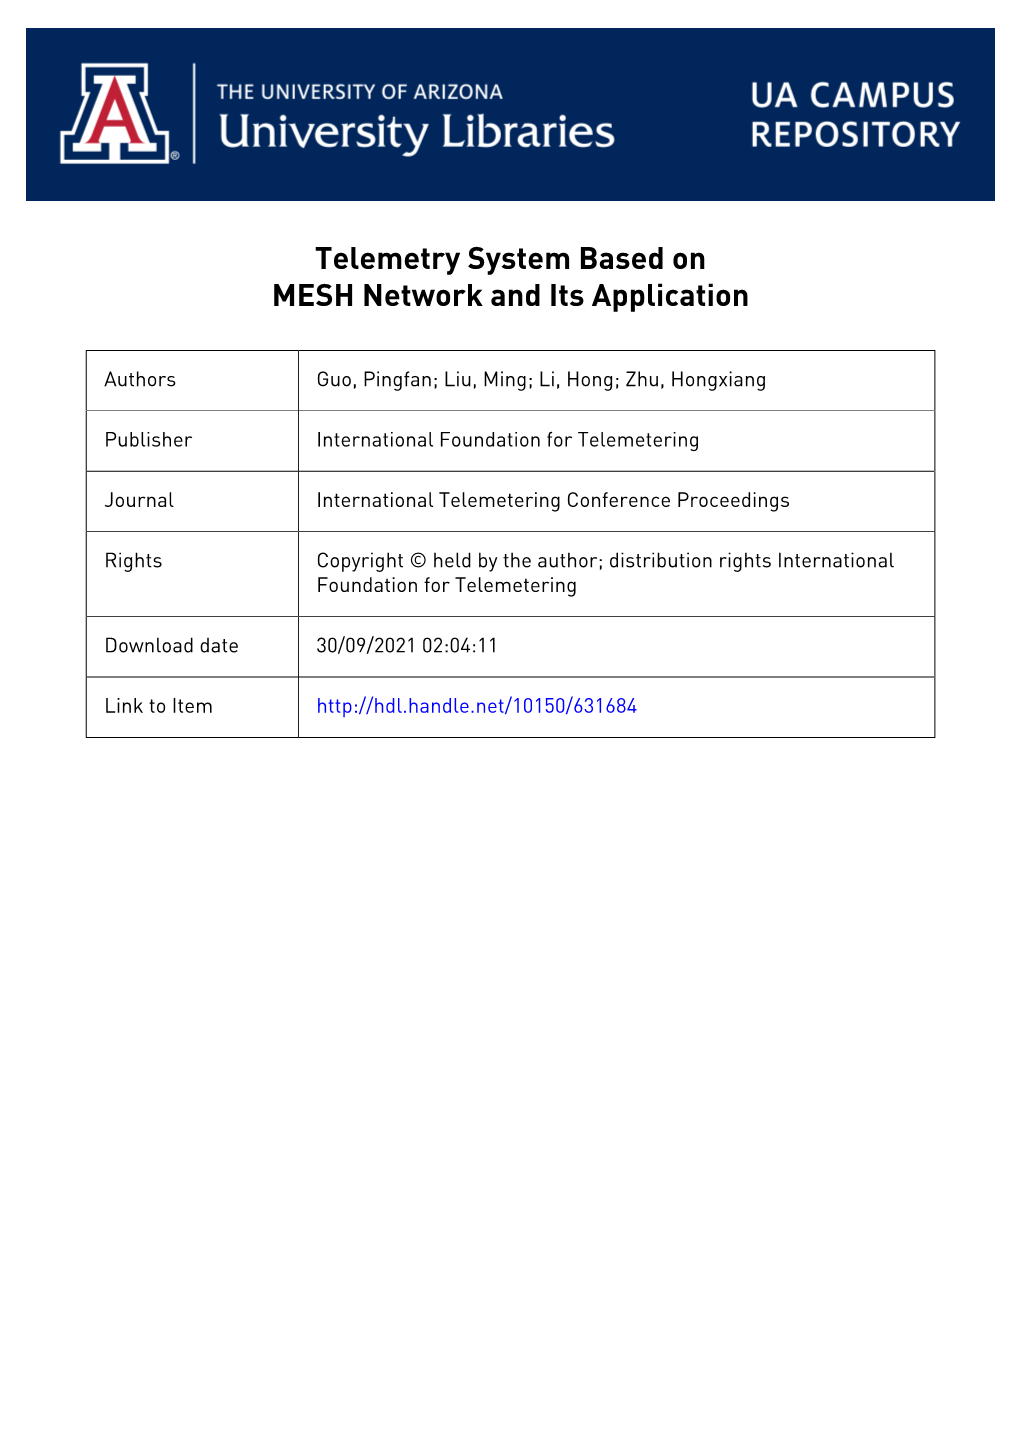 Telemetry System Based on MESH Network and Its Application